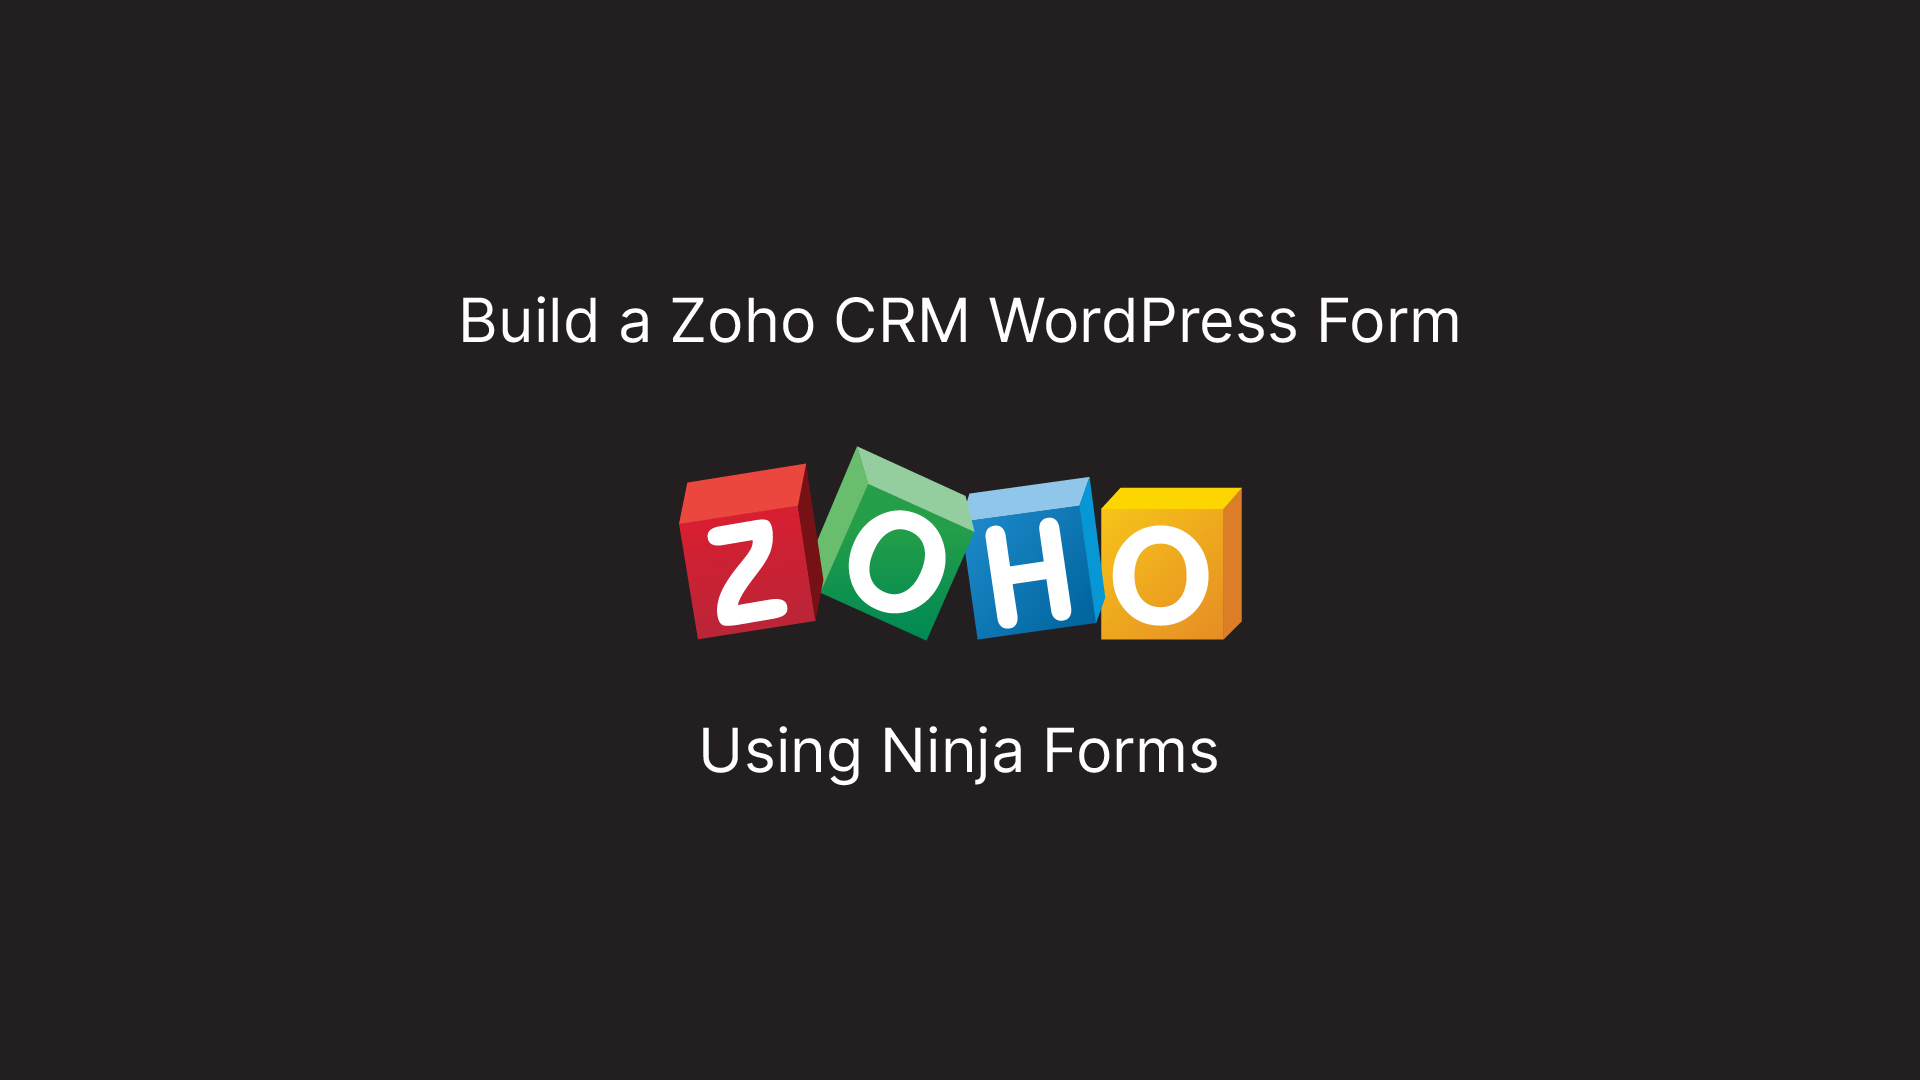 How to build a Zoho CRM form using